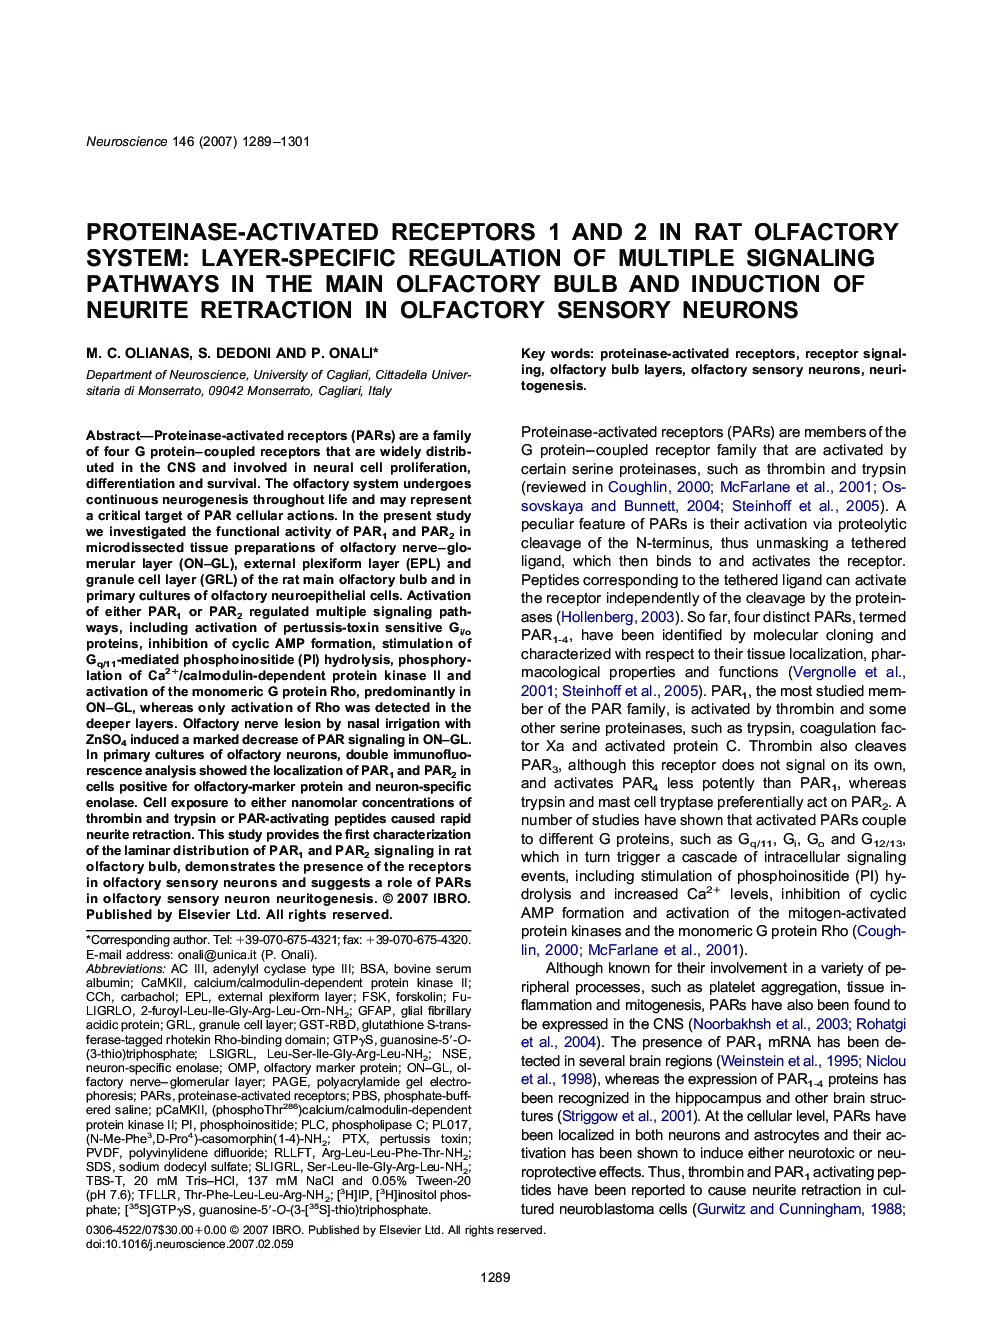 Proteinase-activated receptors 1 and 2 in rat olfactory system: Layer-specific regulation of multiple signaling pathways in the main olfactory bulb and induction of neurite retraction in olfactory sensory neurons